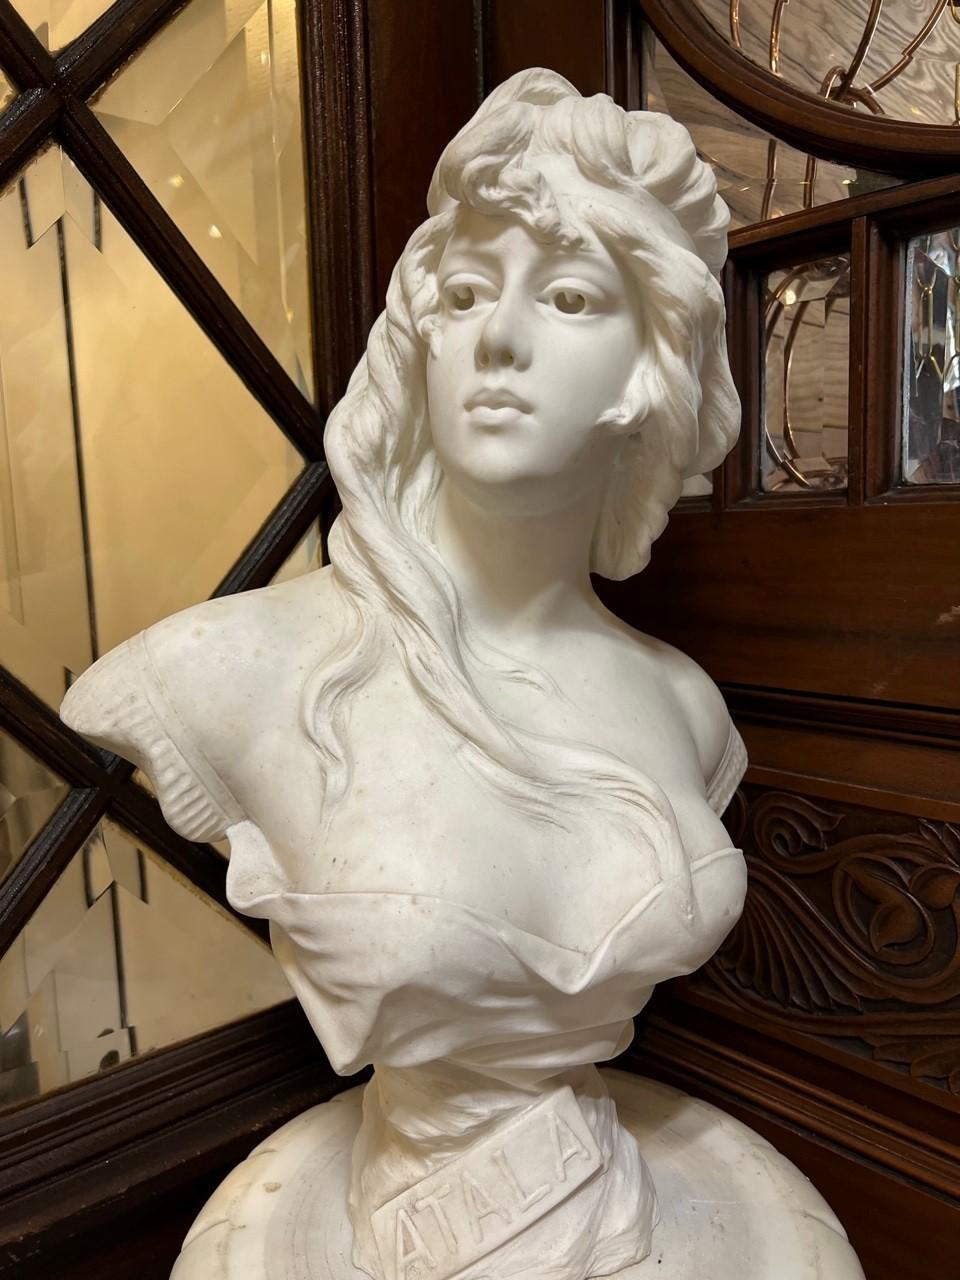 A beautiful marble bust of a young woman Atala, handed carved of white Carrara marble in the 1890s signed A. Piazza, Carrara. Carrara is a city in Italy famous around the would for its white and blue-gray marble quarries used by Michelangelo and